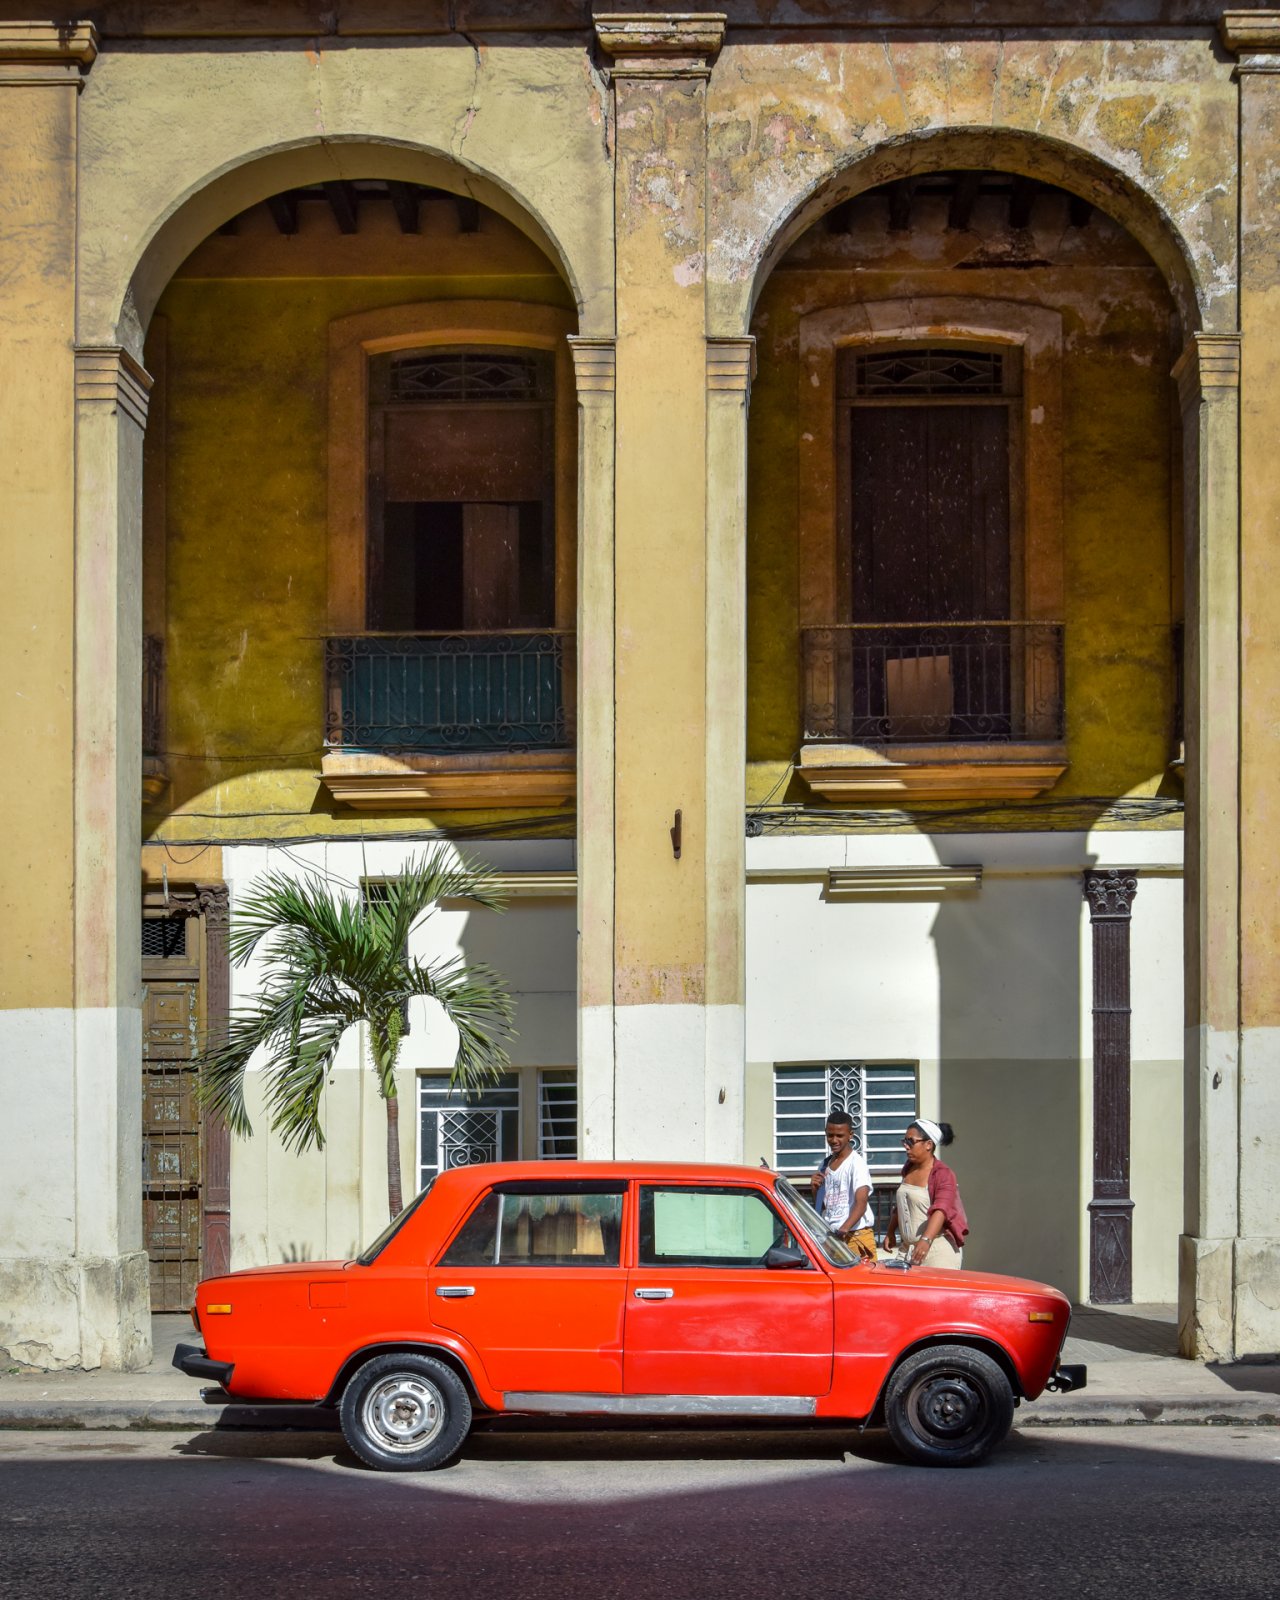 One Spring morning in Havana, Cuba there was a red car that stood as a beacon of Cuban ingenuity and resourcefulness. Automotive repair and design are exampled all throughout the country.